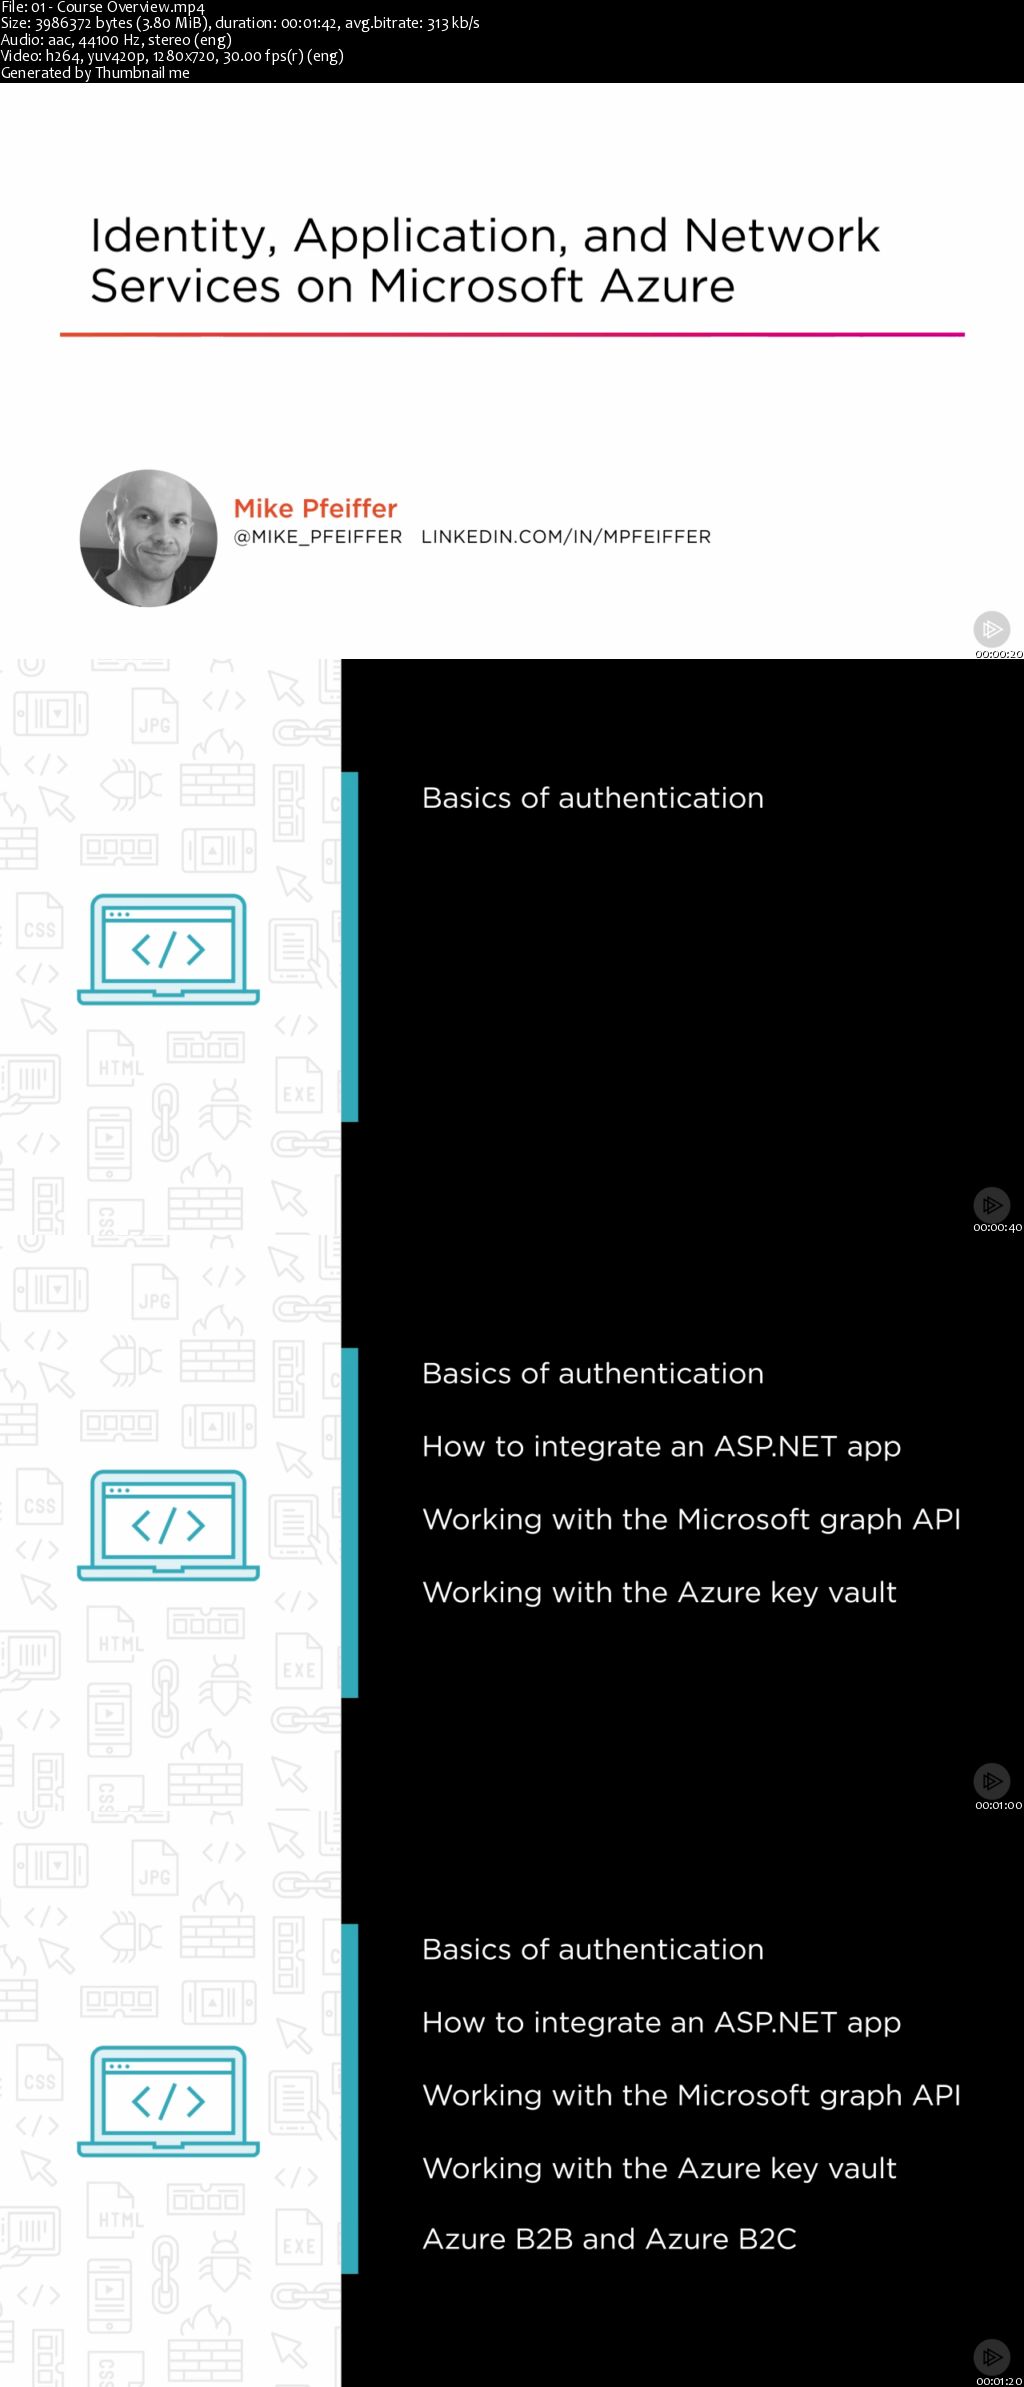 Identity, Application, and Network Services on Microsoft Azure